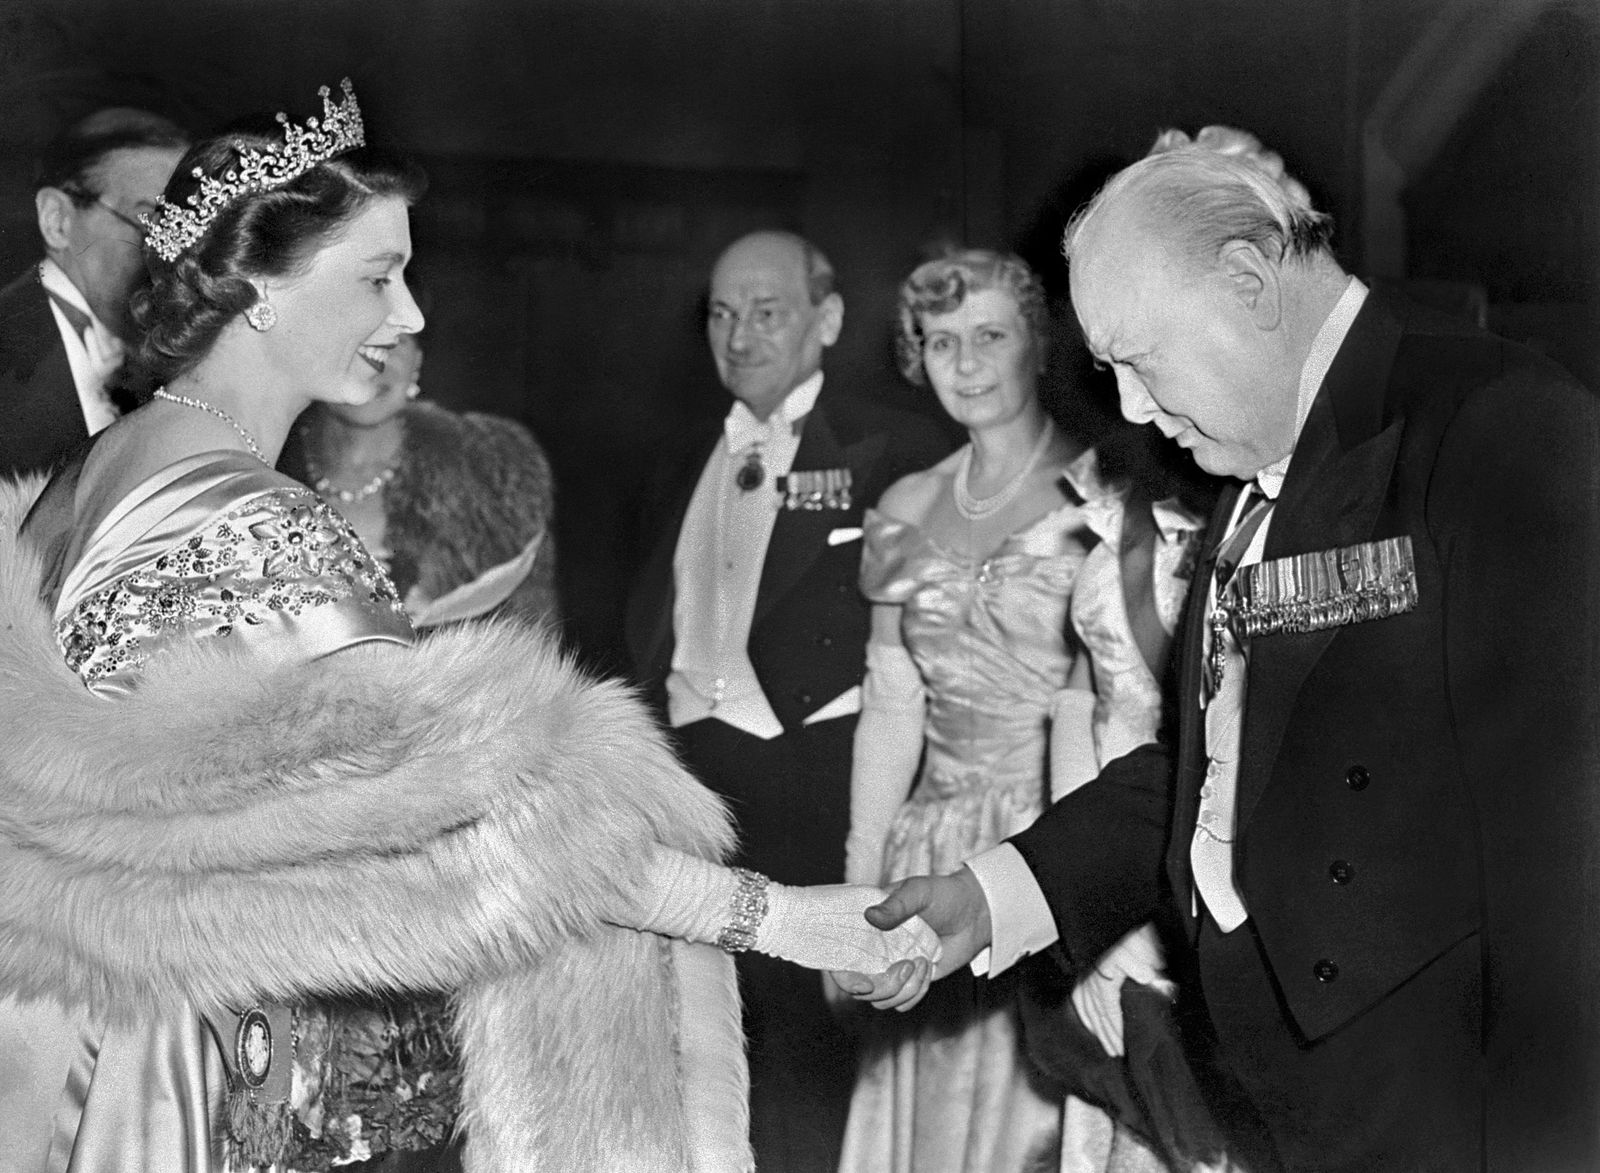 (FILES) In this file photo taken on March 23, 1950 The Princess Elizabeth of Great Britain greets Winston Churchill at a Guildhall reception, in London. - From a string of US presidents to Lady Gaga, Queen Elizabeth II met leading political and artistic personalities from around the globe during her record-breaking time on the throne. Some were despised dictators, others world-famous guitarists she made polite conversation with. Regardless of the personalities, she always kept her composure. (Photo by - / AFP) - AFP